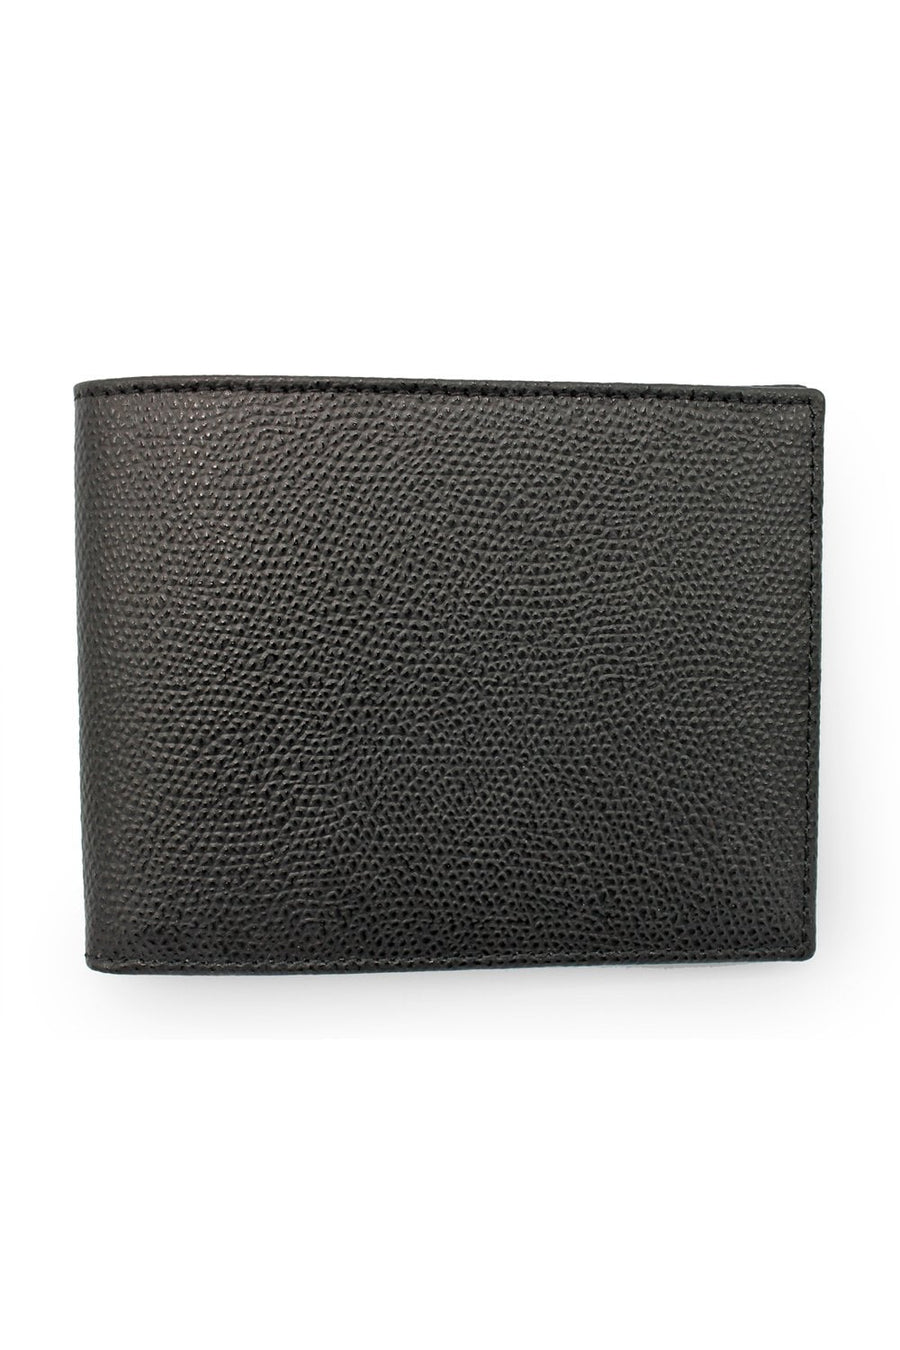 Buy the Elliot Rhodes Dauphin Wallet in Black at Intro. Spend £50 for free UK delivery. Official stockists. We ship worldwide.